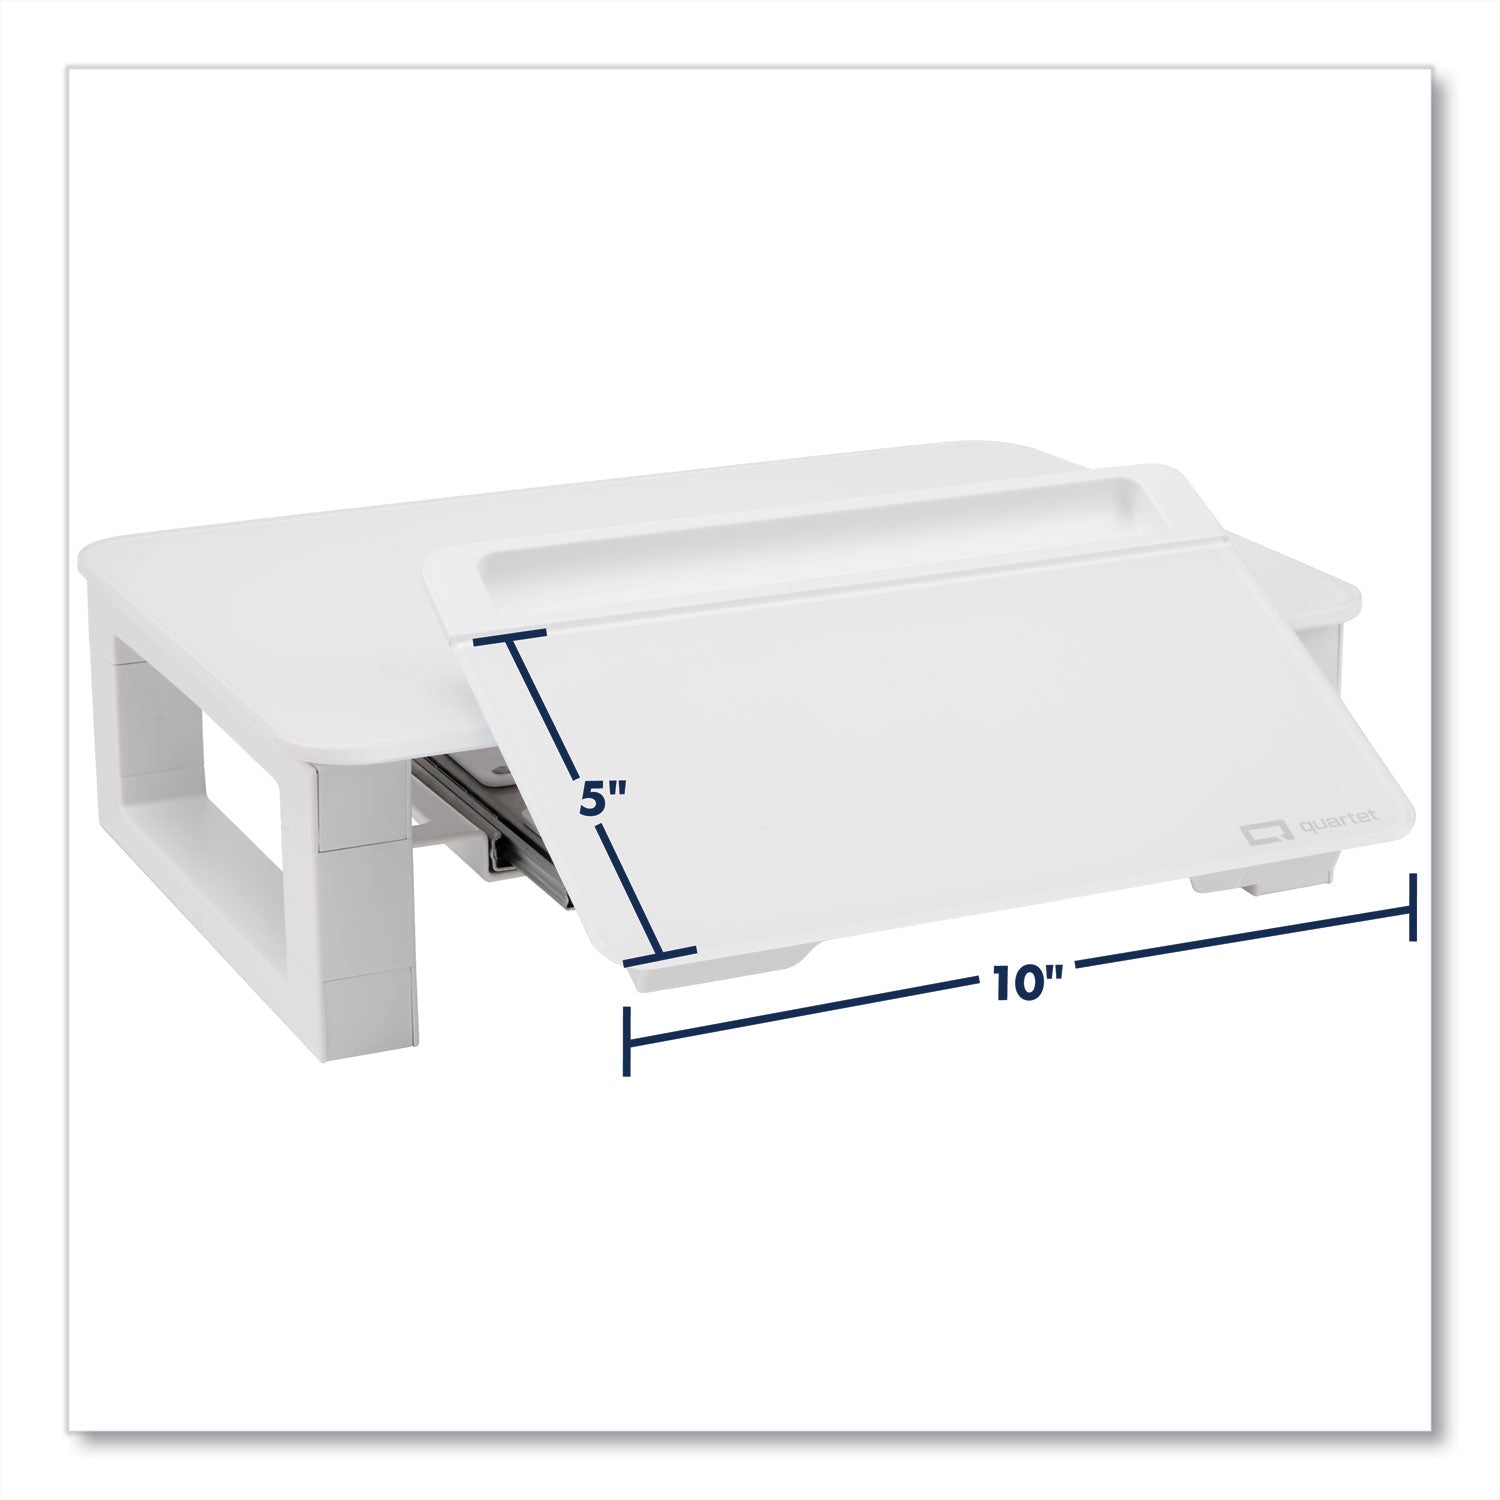 adjustable-height-desktop-glass-monitor-riser-with-dry-erase-board-14-x-1025-x-25-to-525-white-supports-100-lb_qrtq090gmrw01 - 1